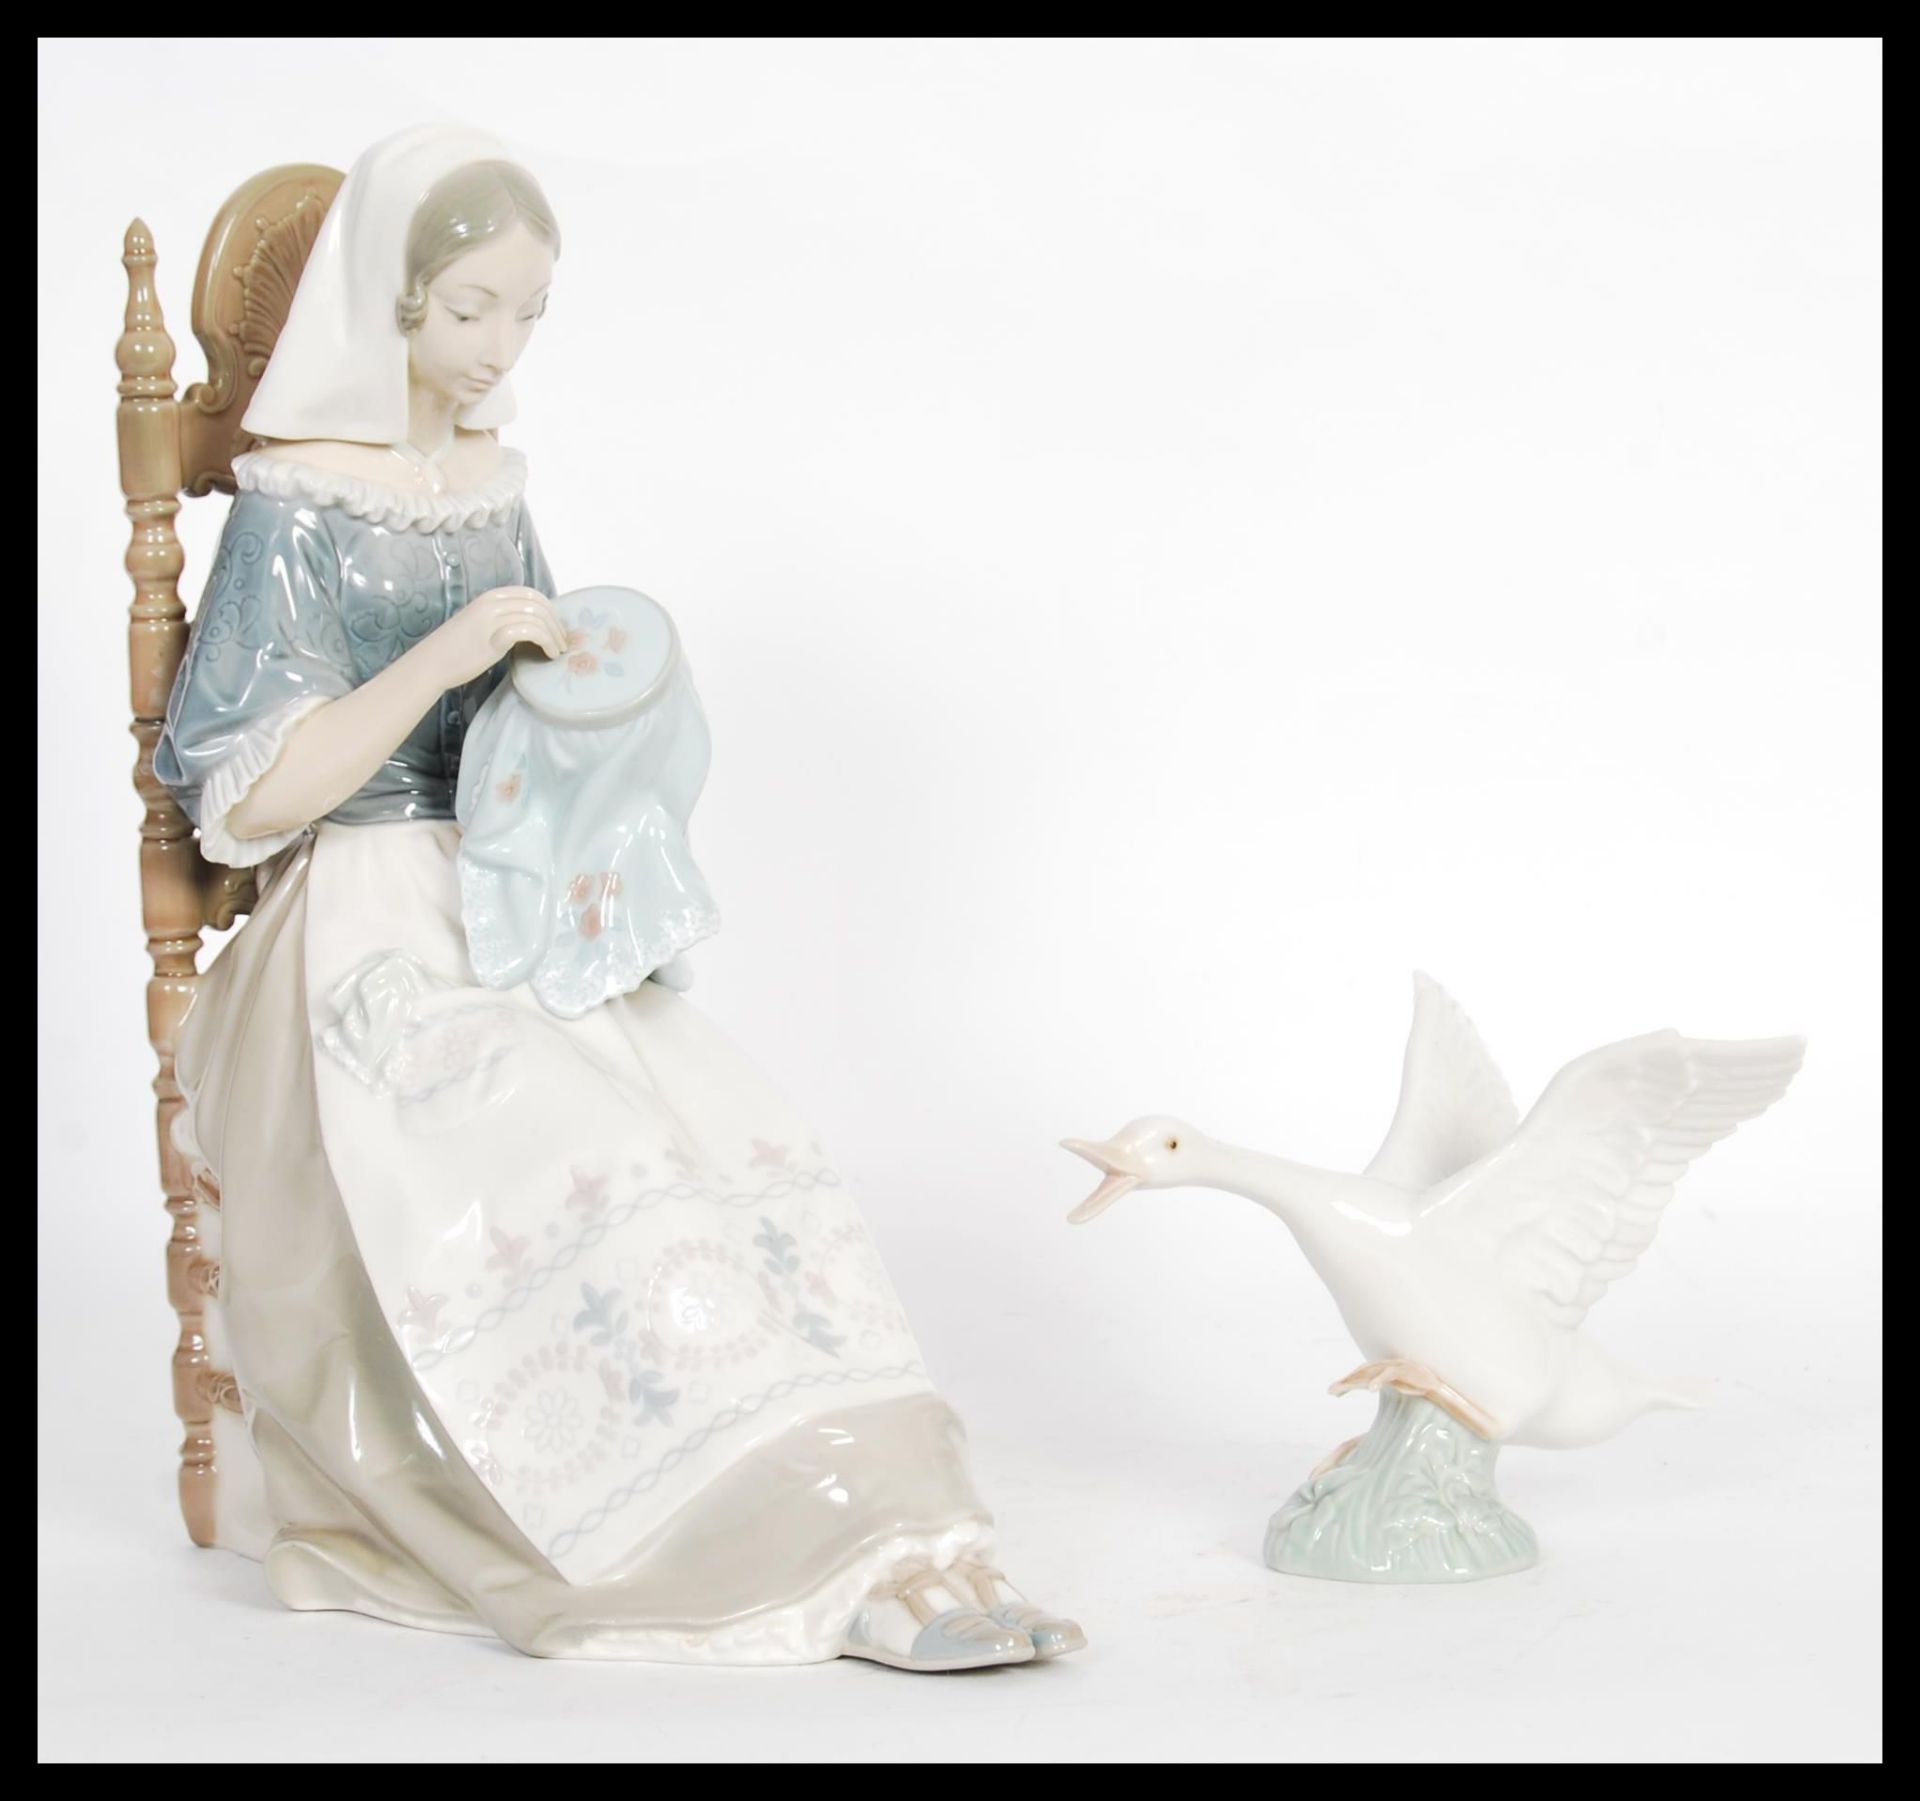 A Lladro porcelain figure depicting a woman doing embroidery seated in a chair along with a figurine